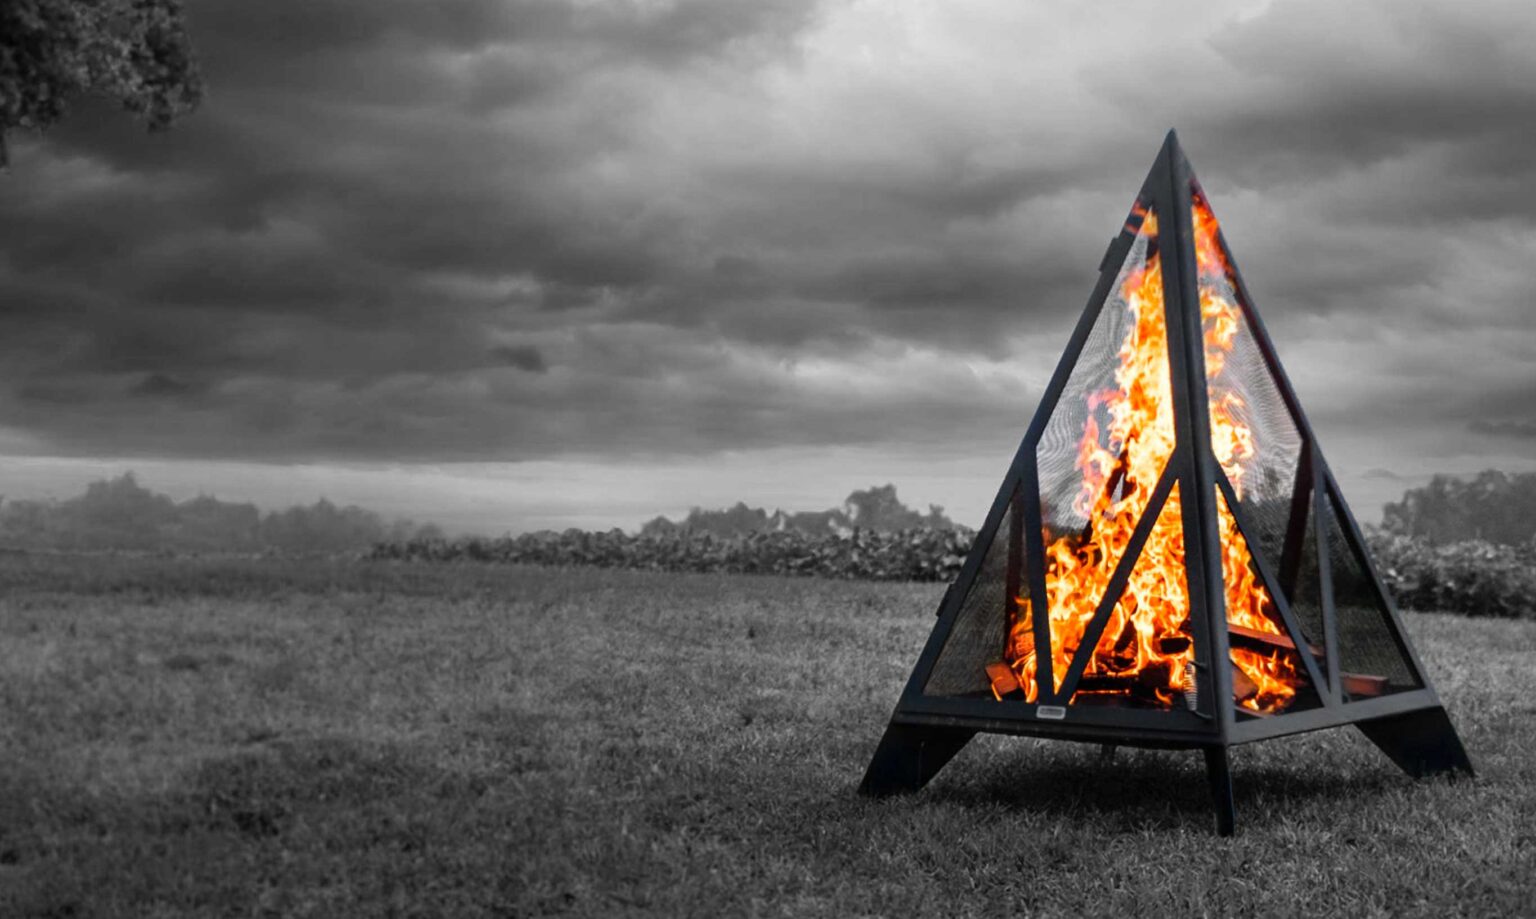 Pyramid fireplace in field. Background in black and white